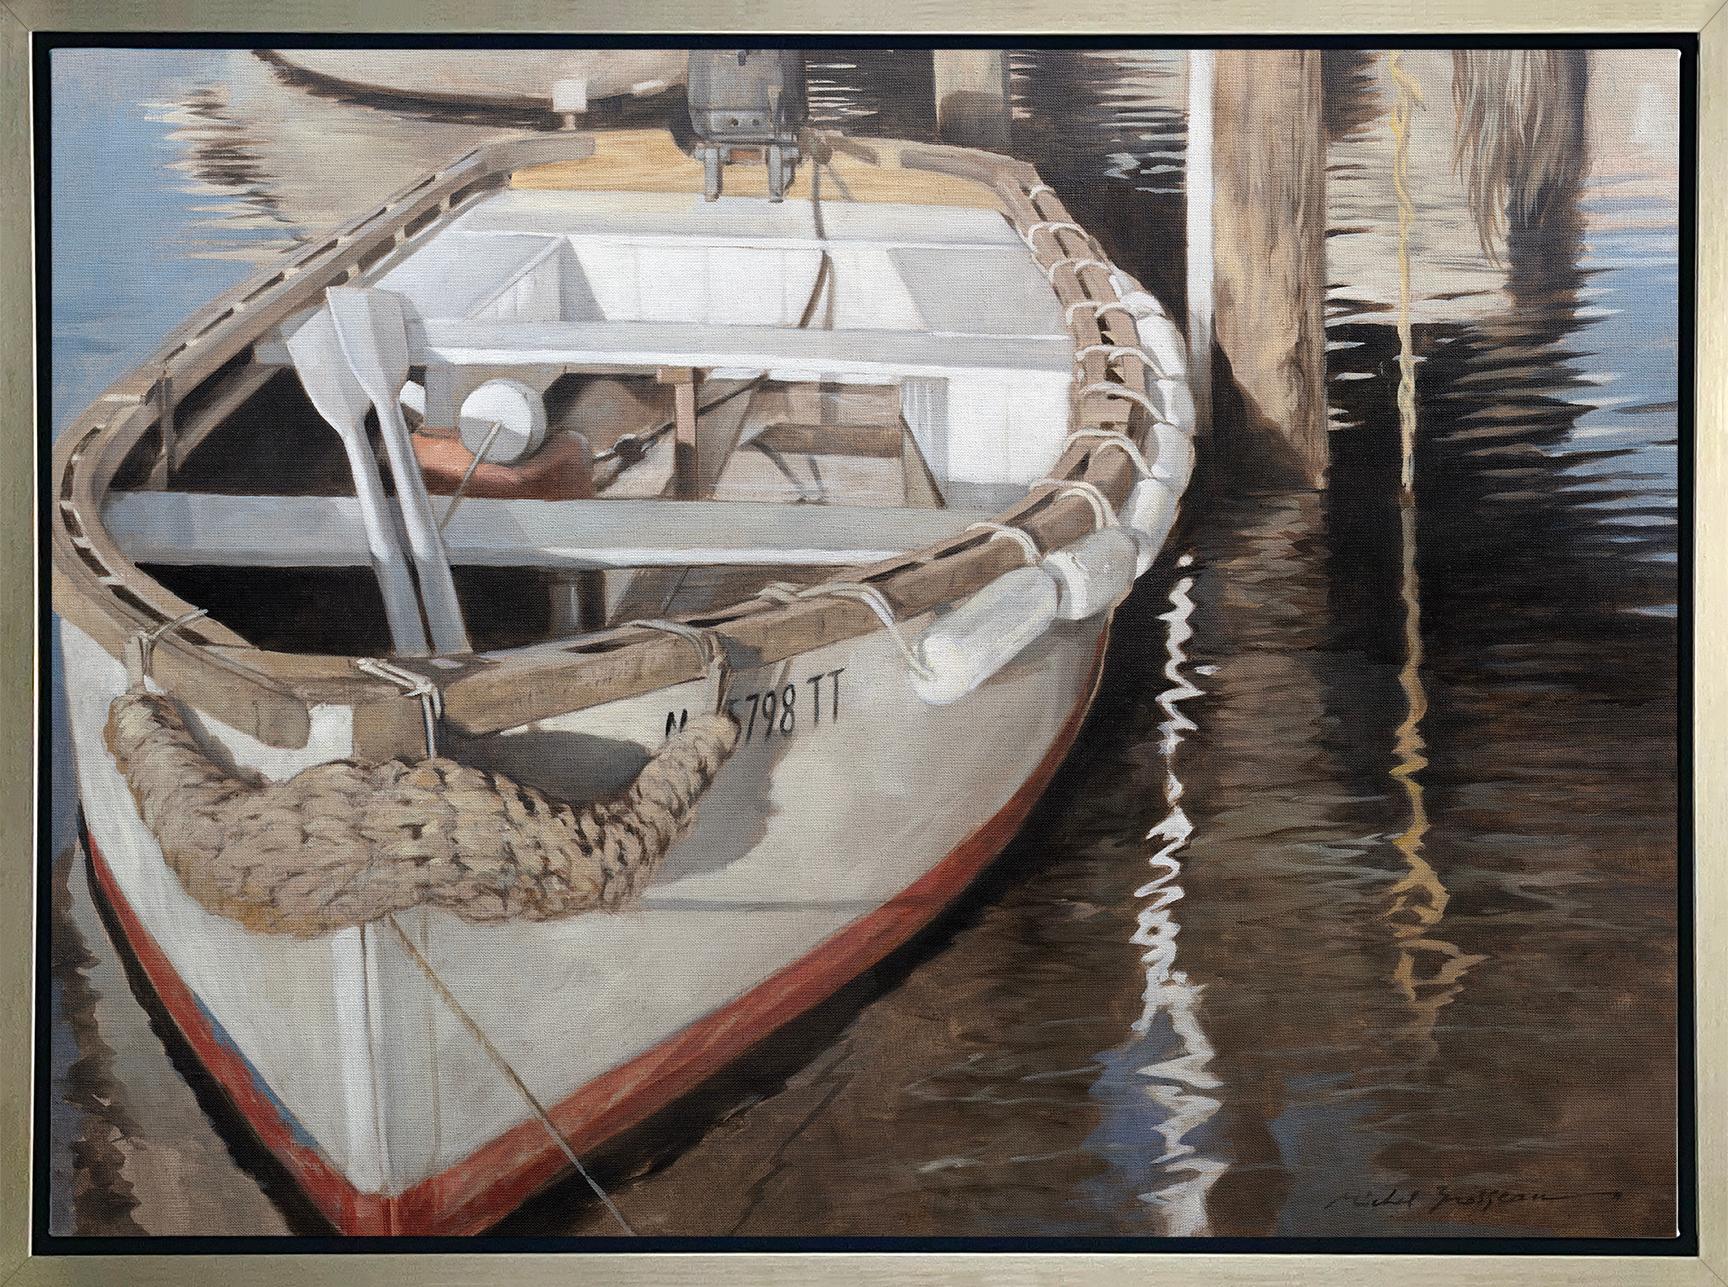 "Vineyard Haven Dinghy," Framed Limited Edition Giclee Print, 45" x 60"